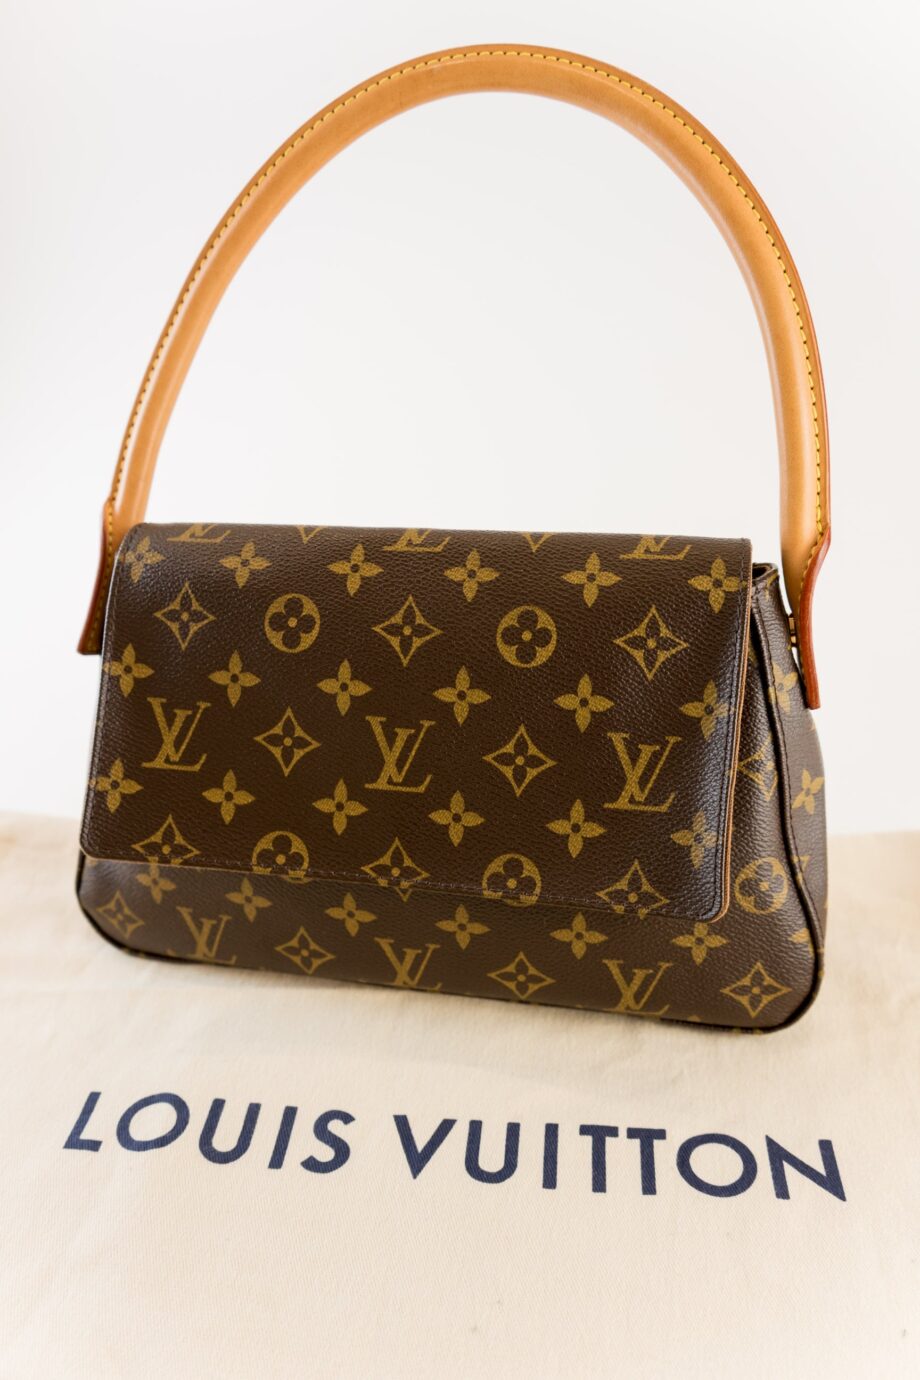 Louis Vuitton looping bag with dustbag